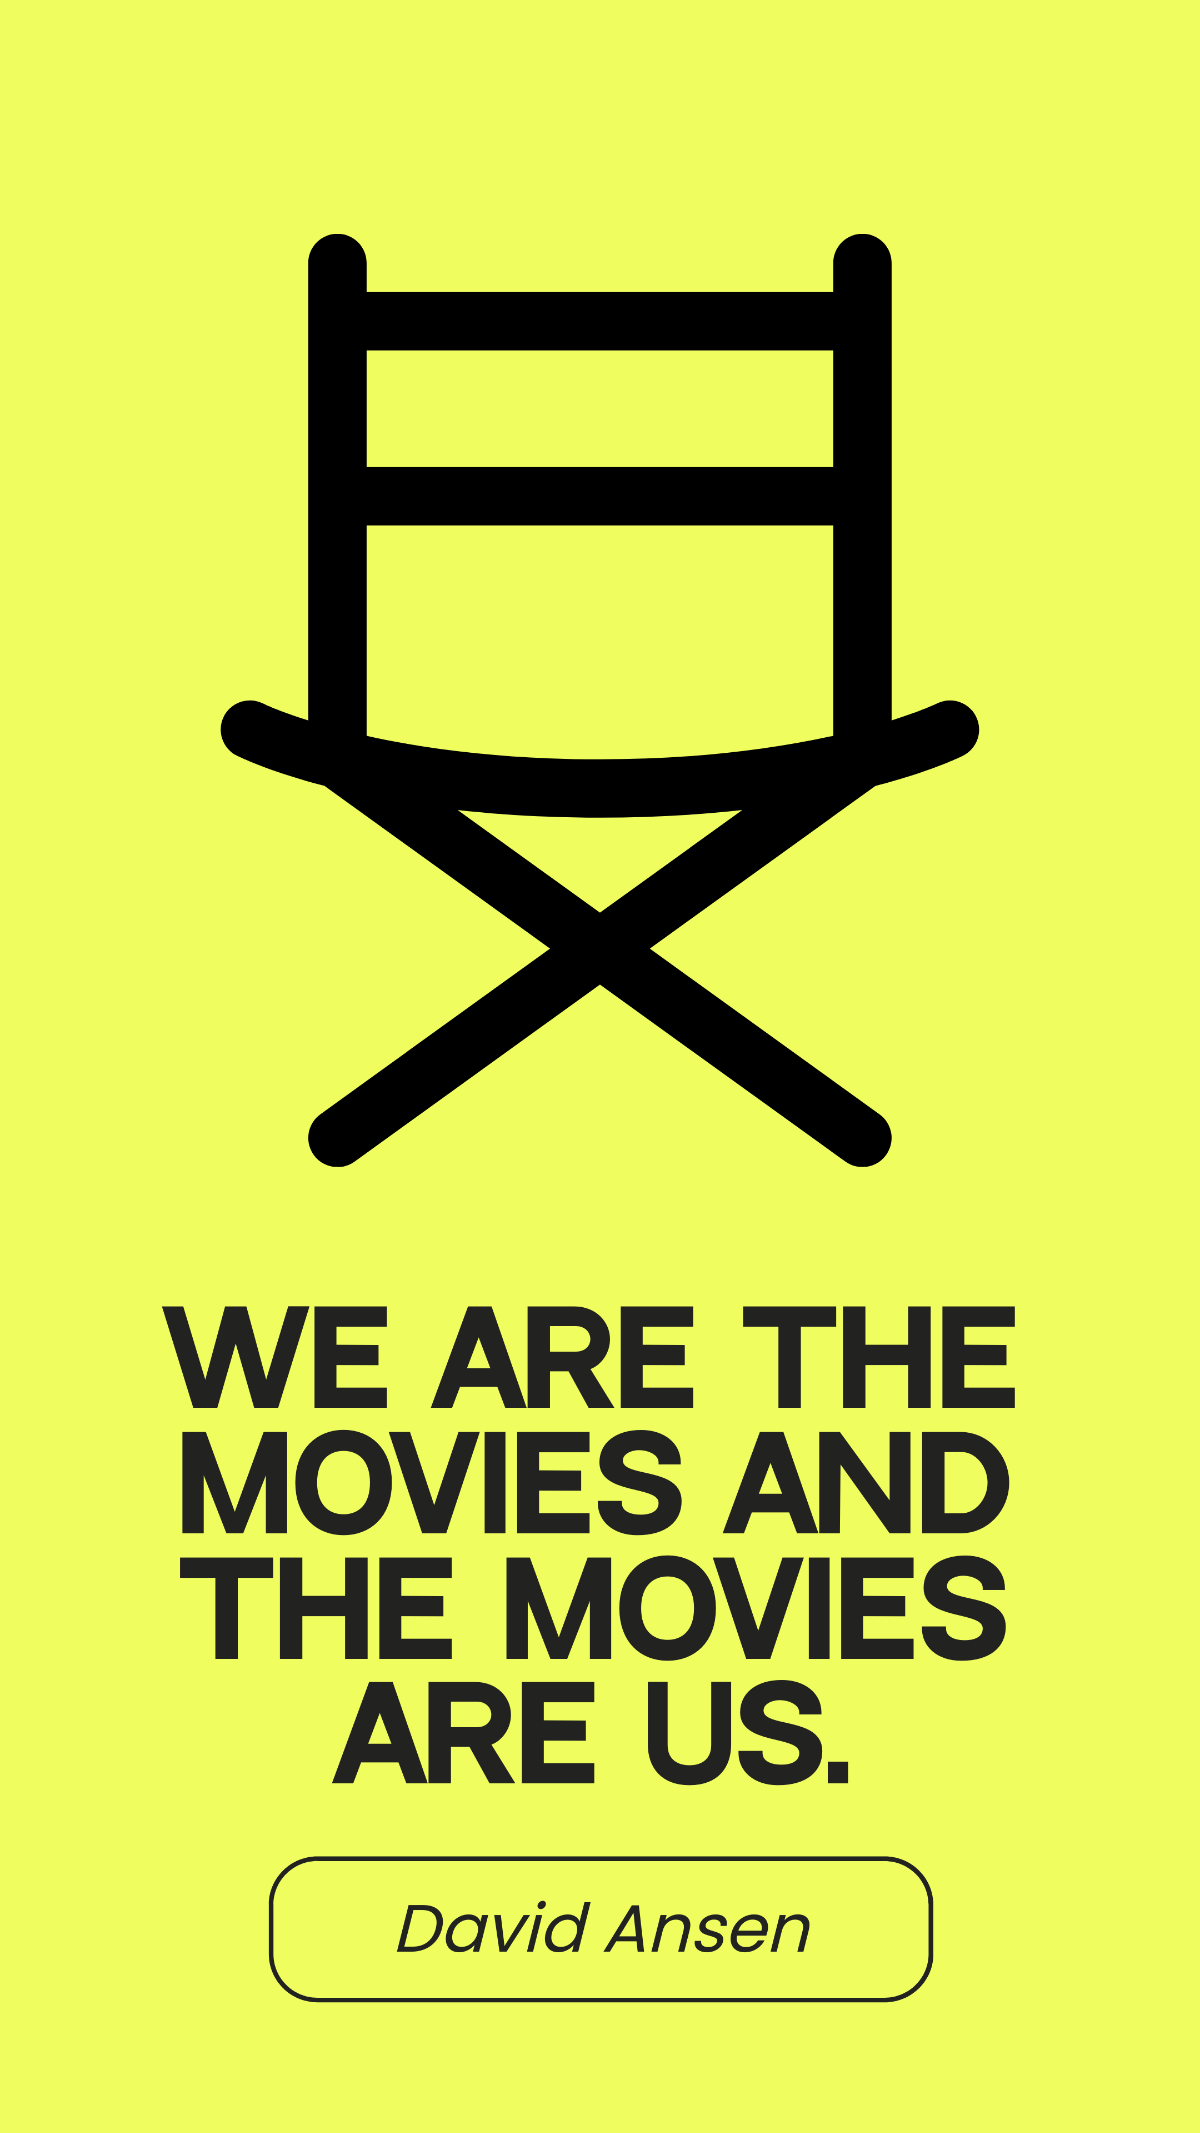 David Ansen - We are the movies and the movies are us. Template